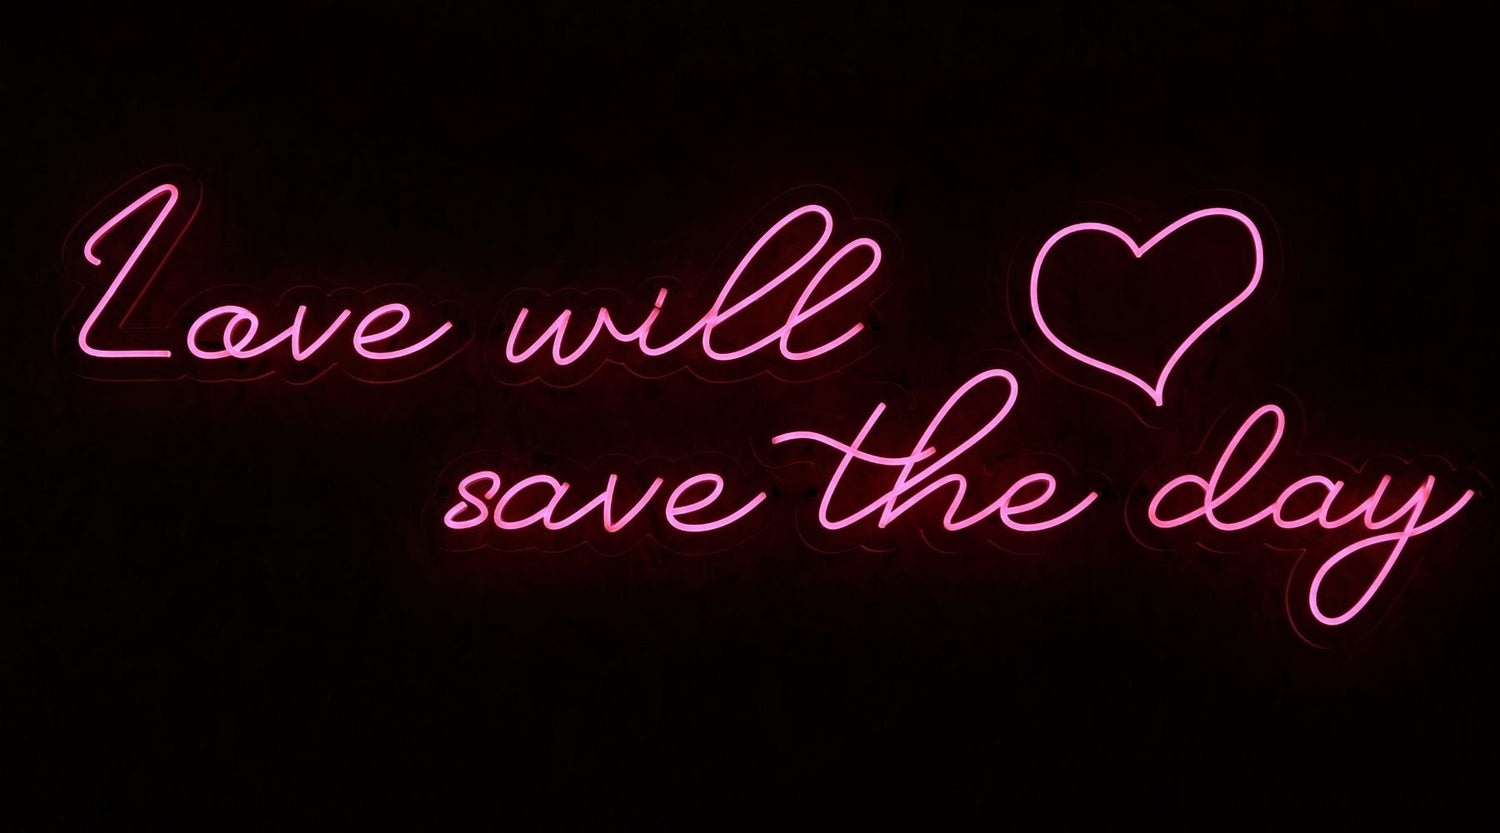 Love will save the day neon sign